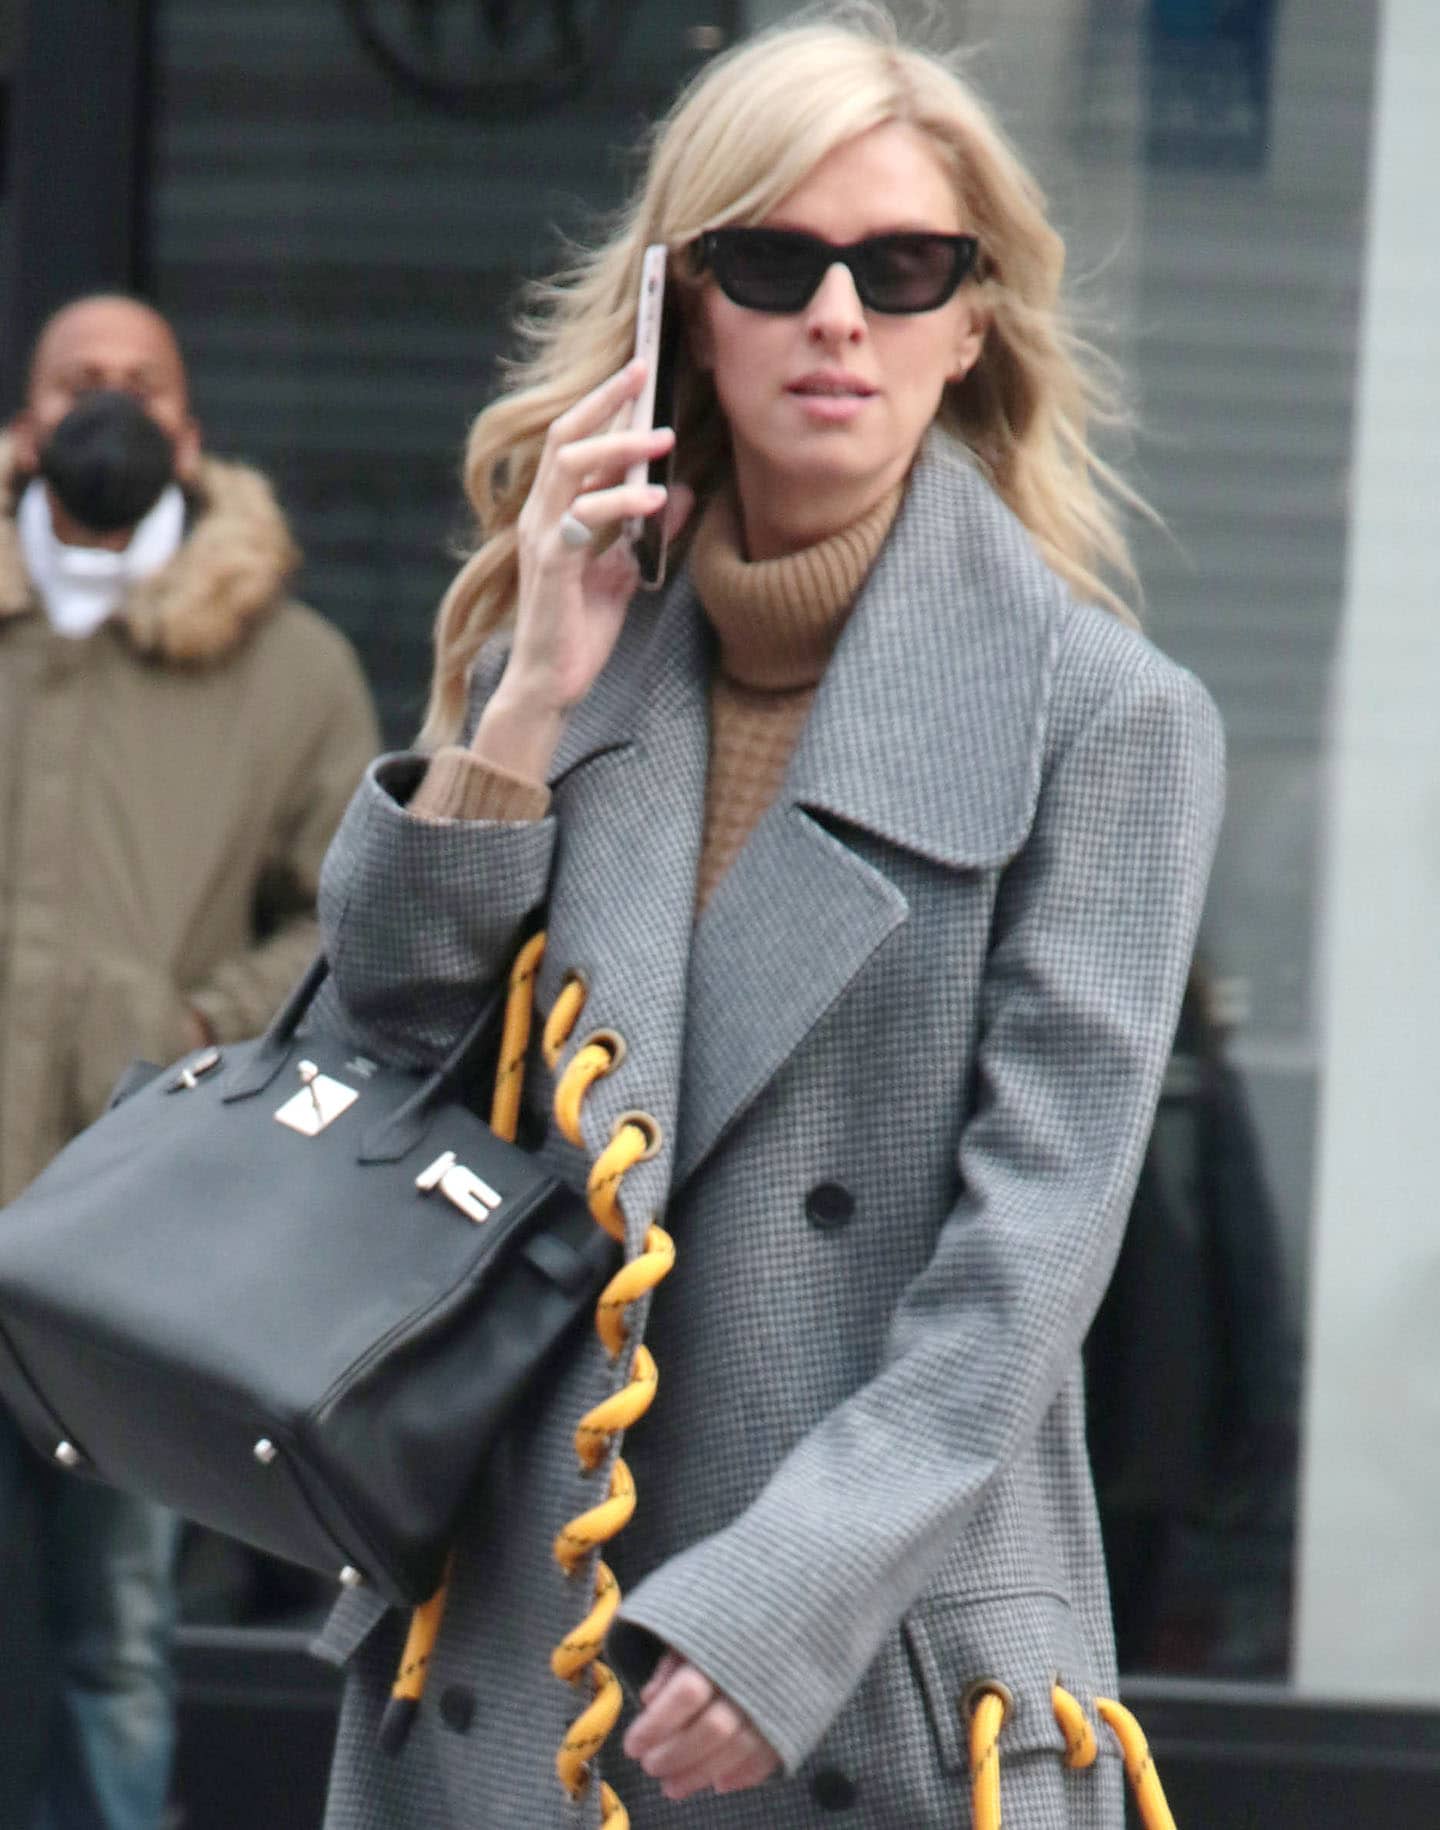 Nicky Hilton wears her blonde hair down and shields her eyes behind black sunnies